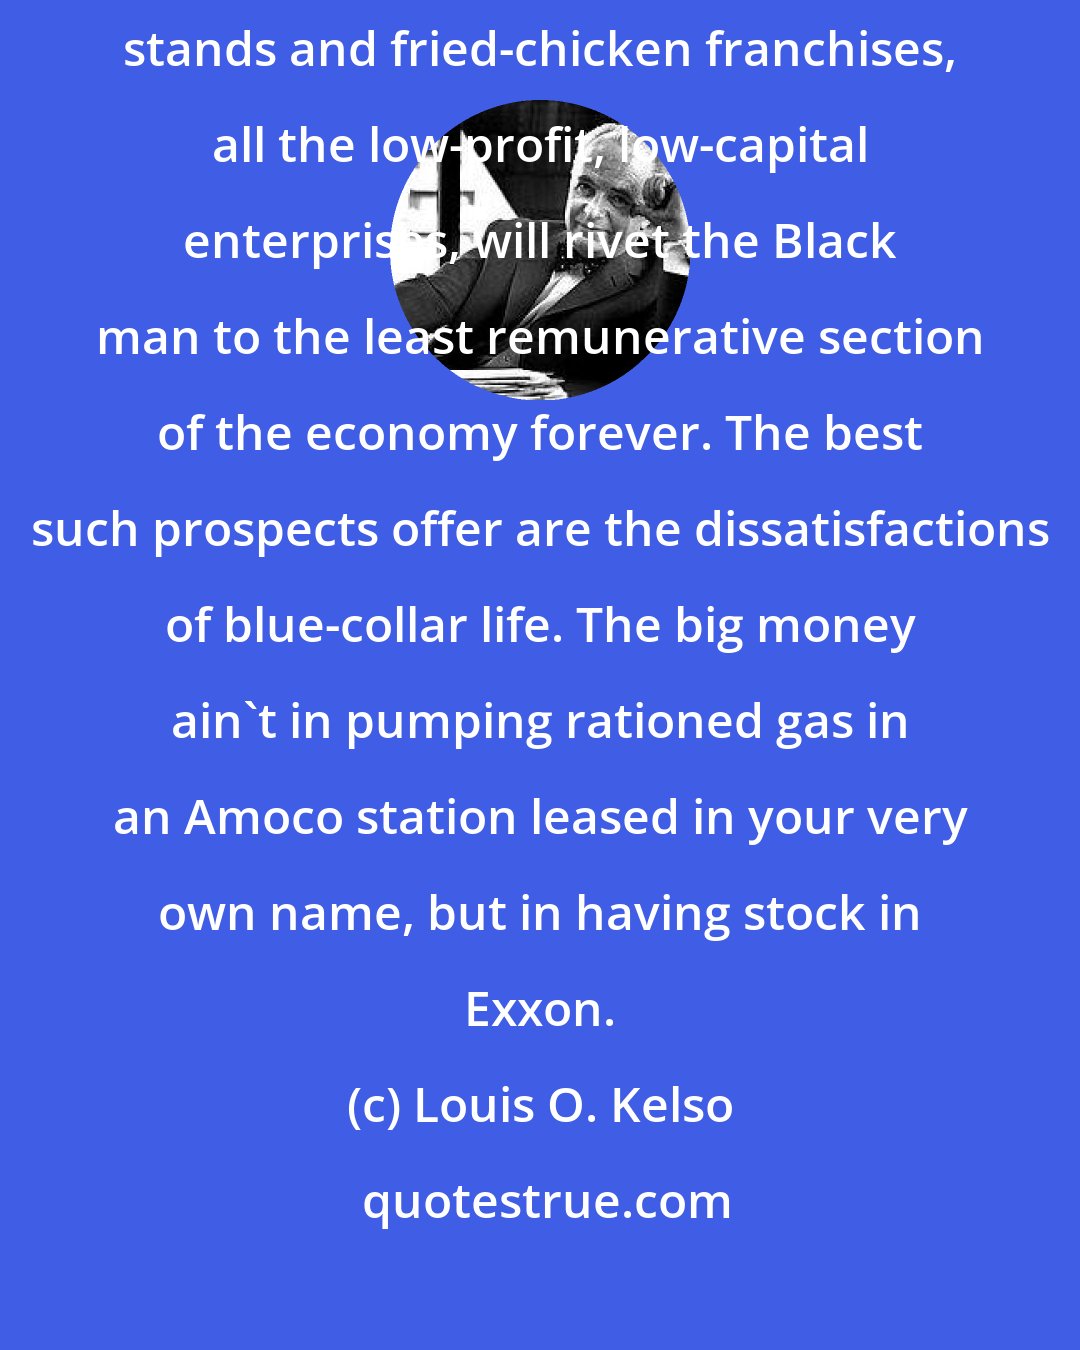 Louis O. Kelso: The schemes to set up blacks in cleaning stores, gas stations, hamburger stands and fried-chicken franchises, all the low-profit, low-capital enterprises, will rivet the Black man to the least remunerative section of the economy forever. The best such prospects offer are the dissatisfactions of blue-collar life. The big money ain't in pumping rationed gas in an Amoco station leased in your very own name, but in having stock in Exxon.